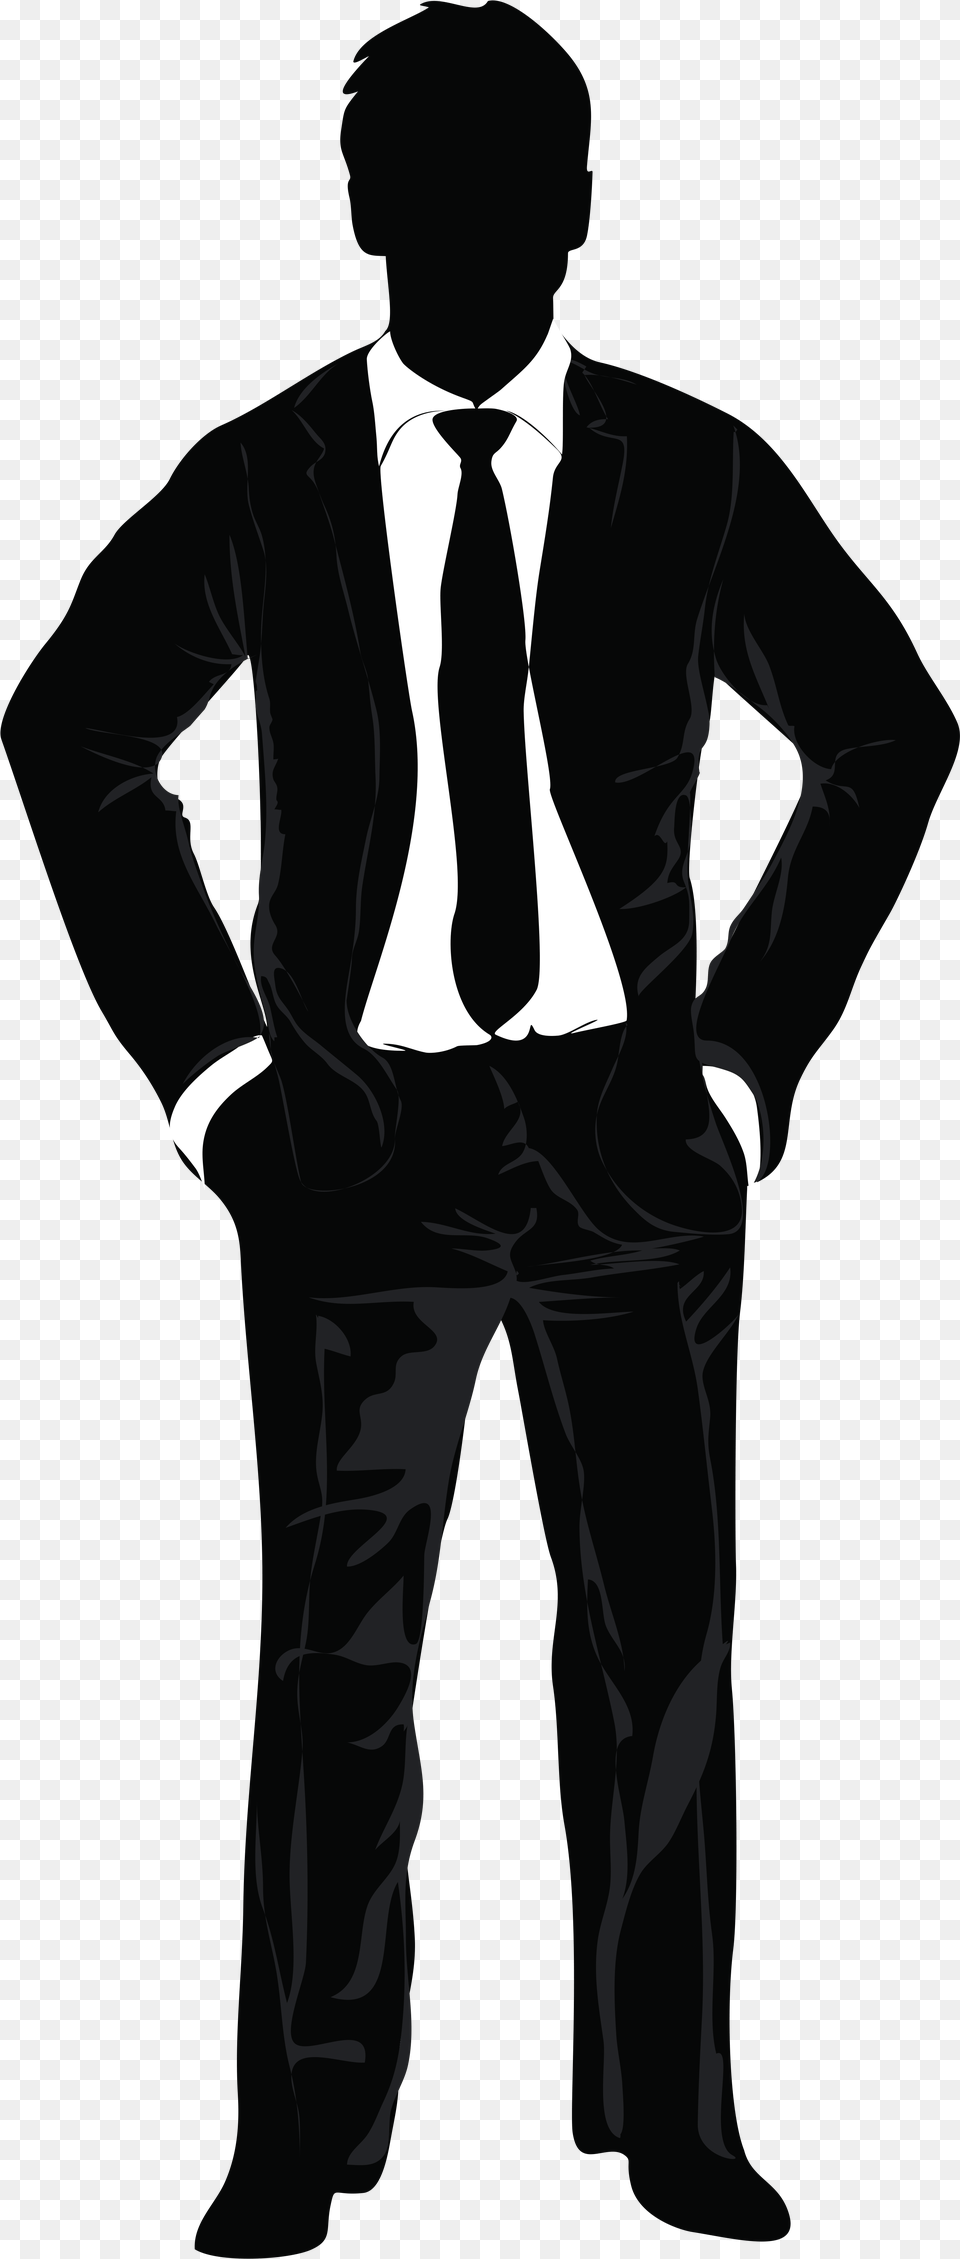 Index Of Assetsirrigationimages Tripod, Accessories, Tie, Clothing, Formal Wear Free Transparent Png